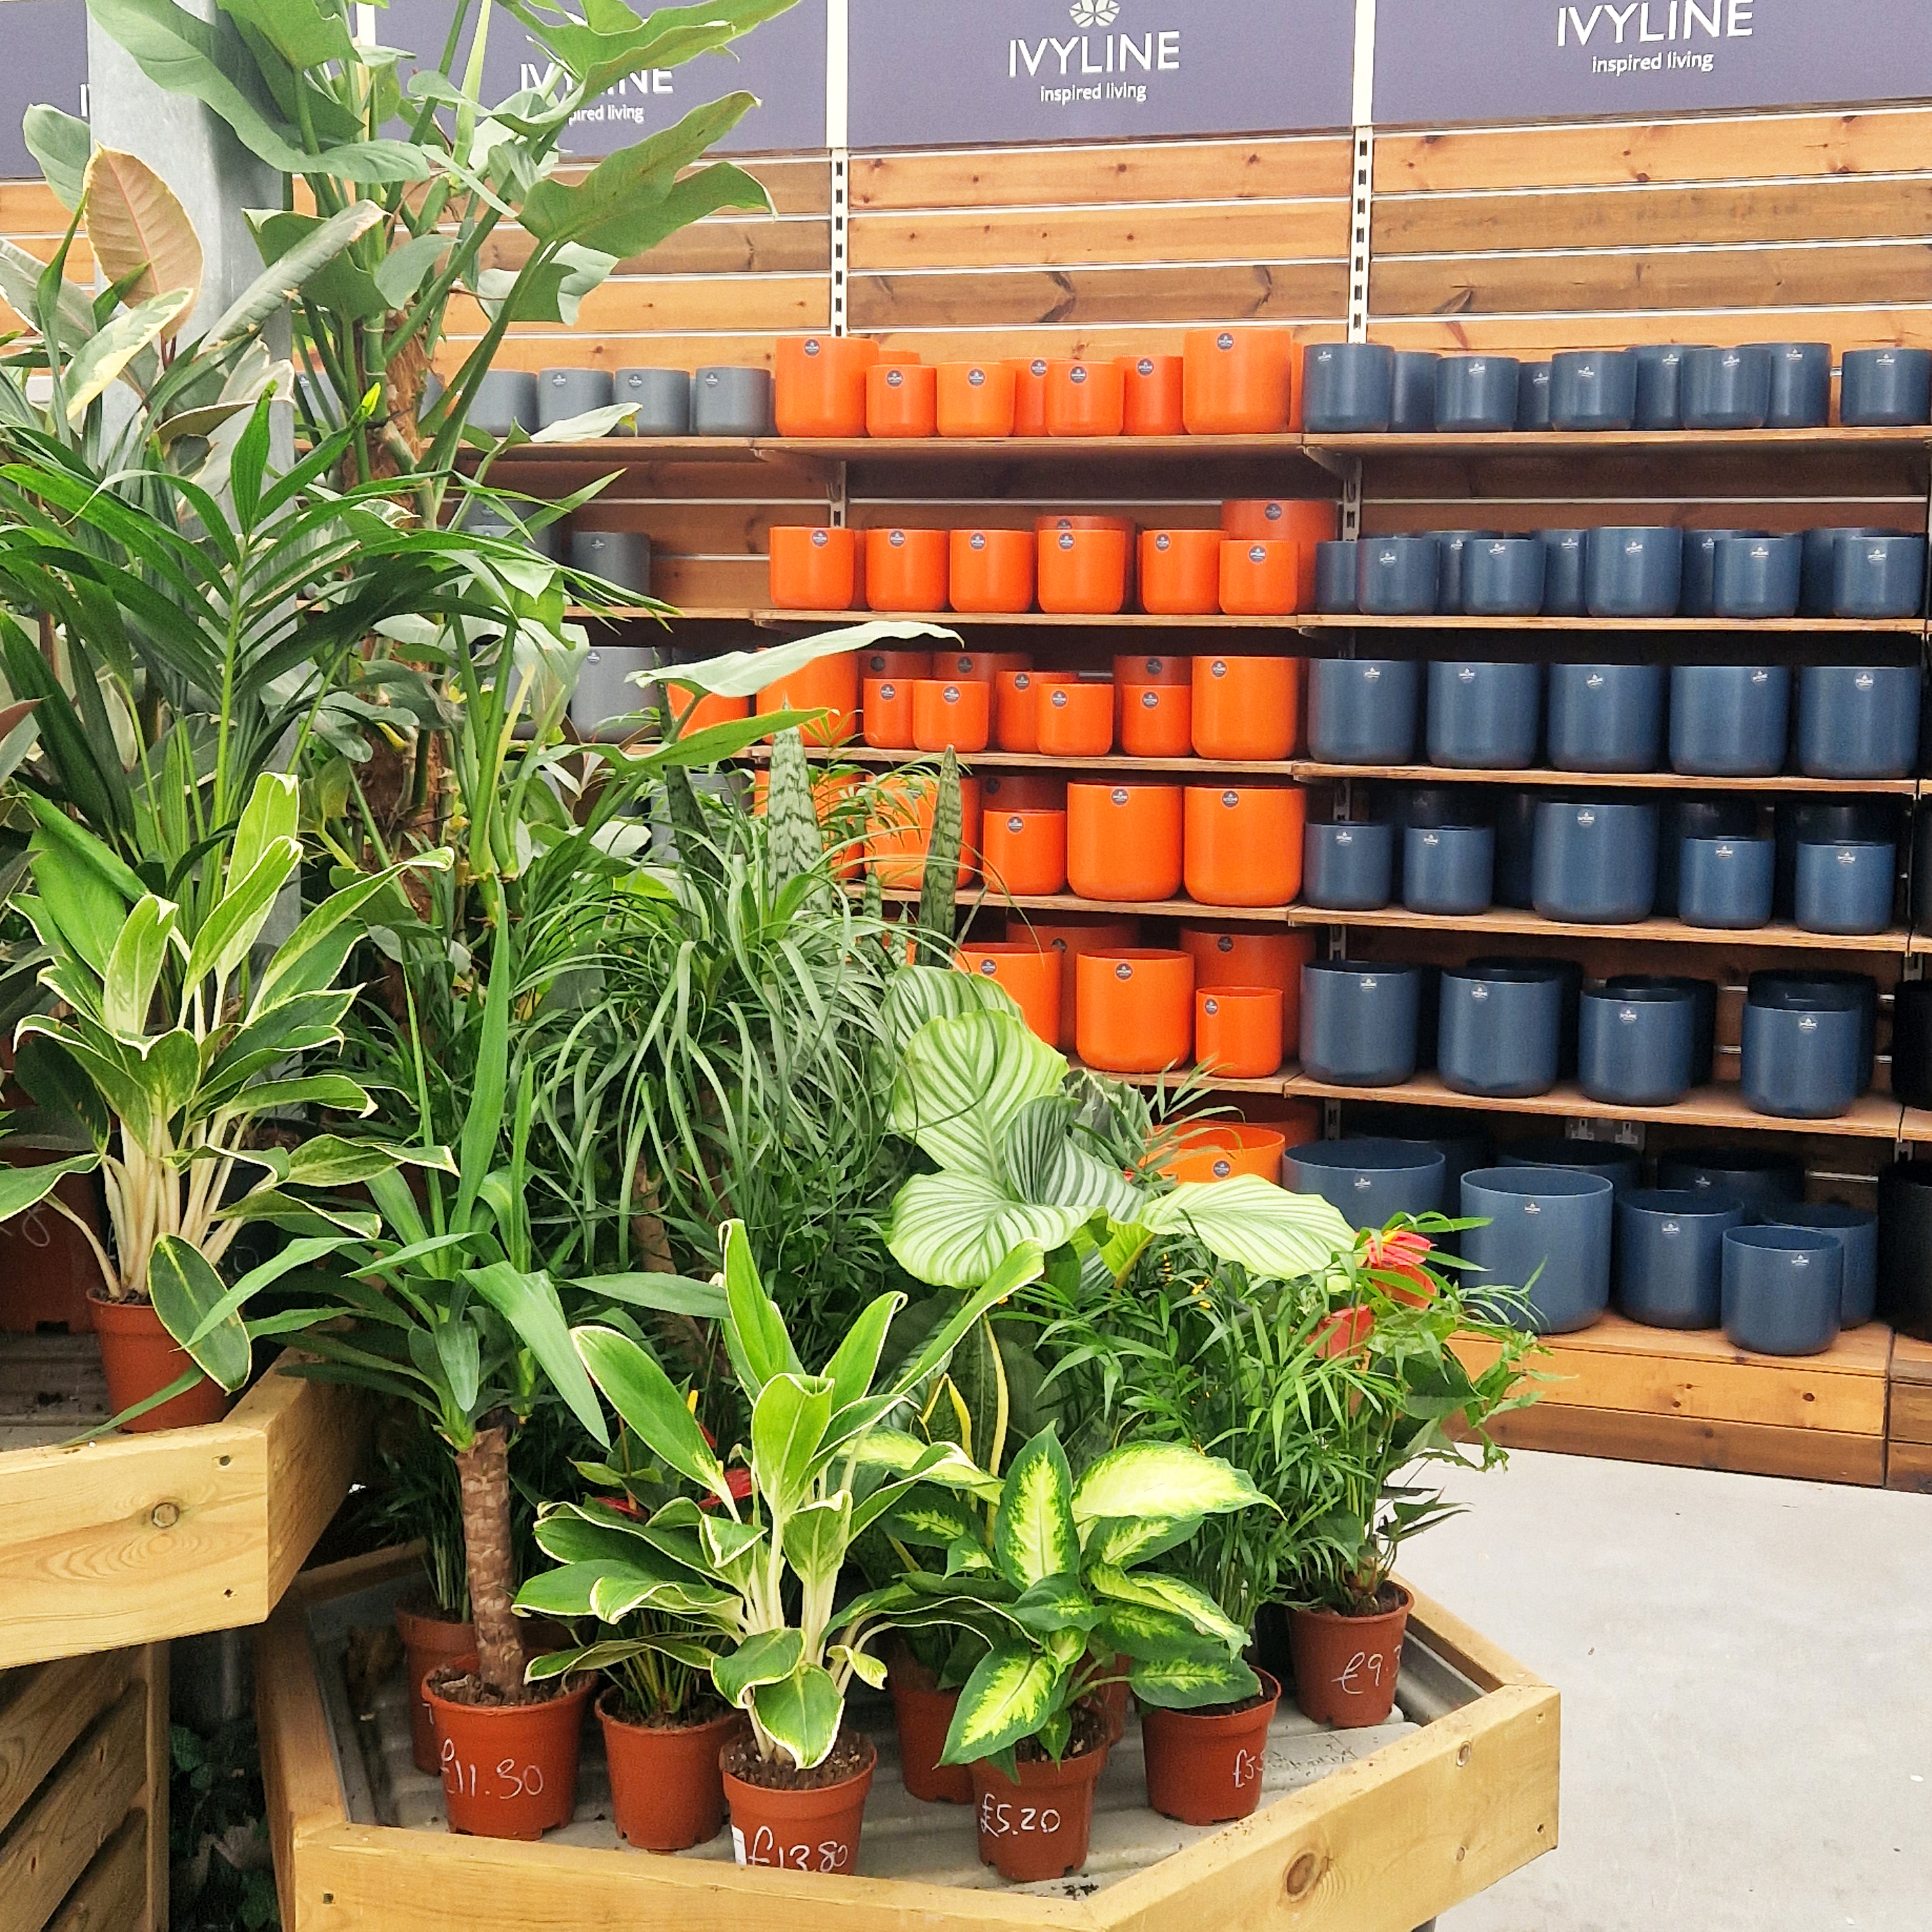 A display of indoor plant and pots